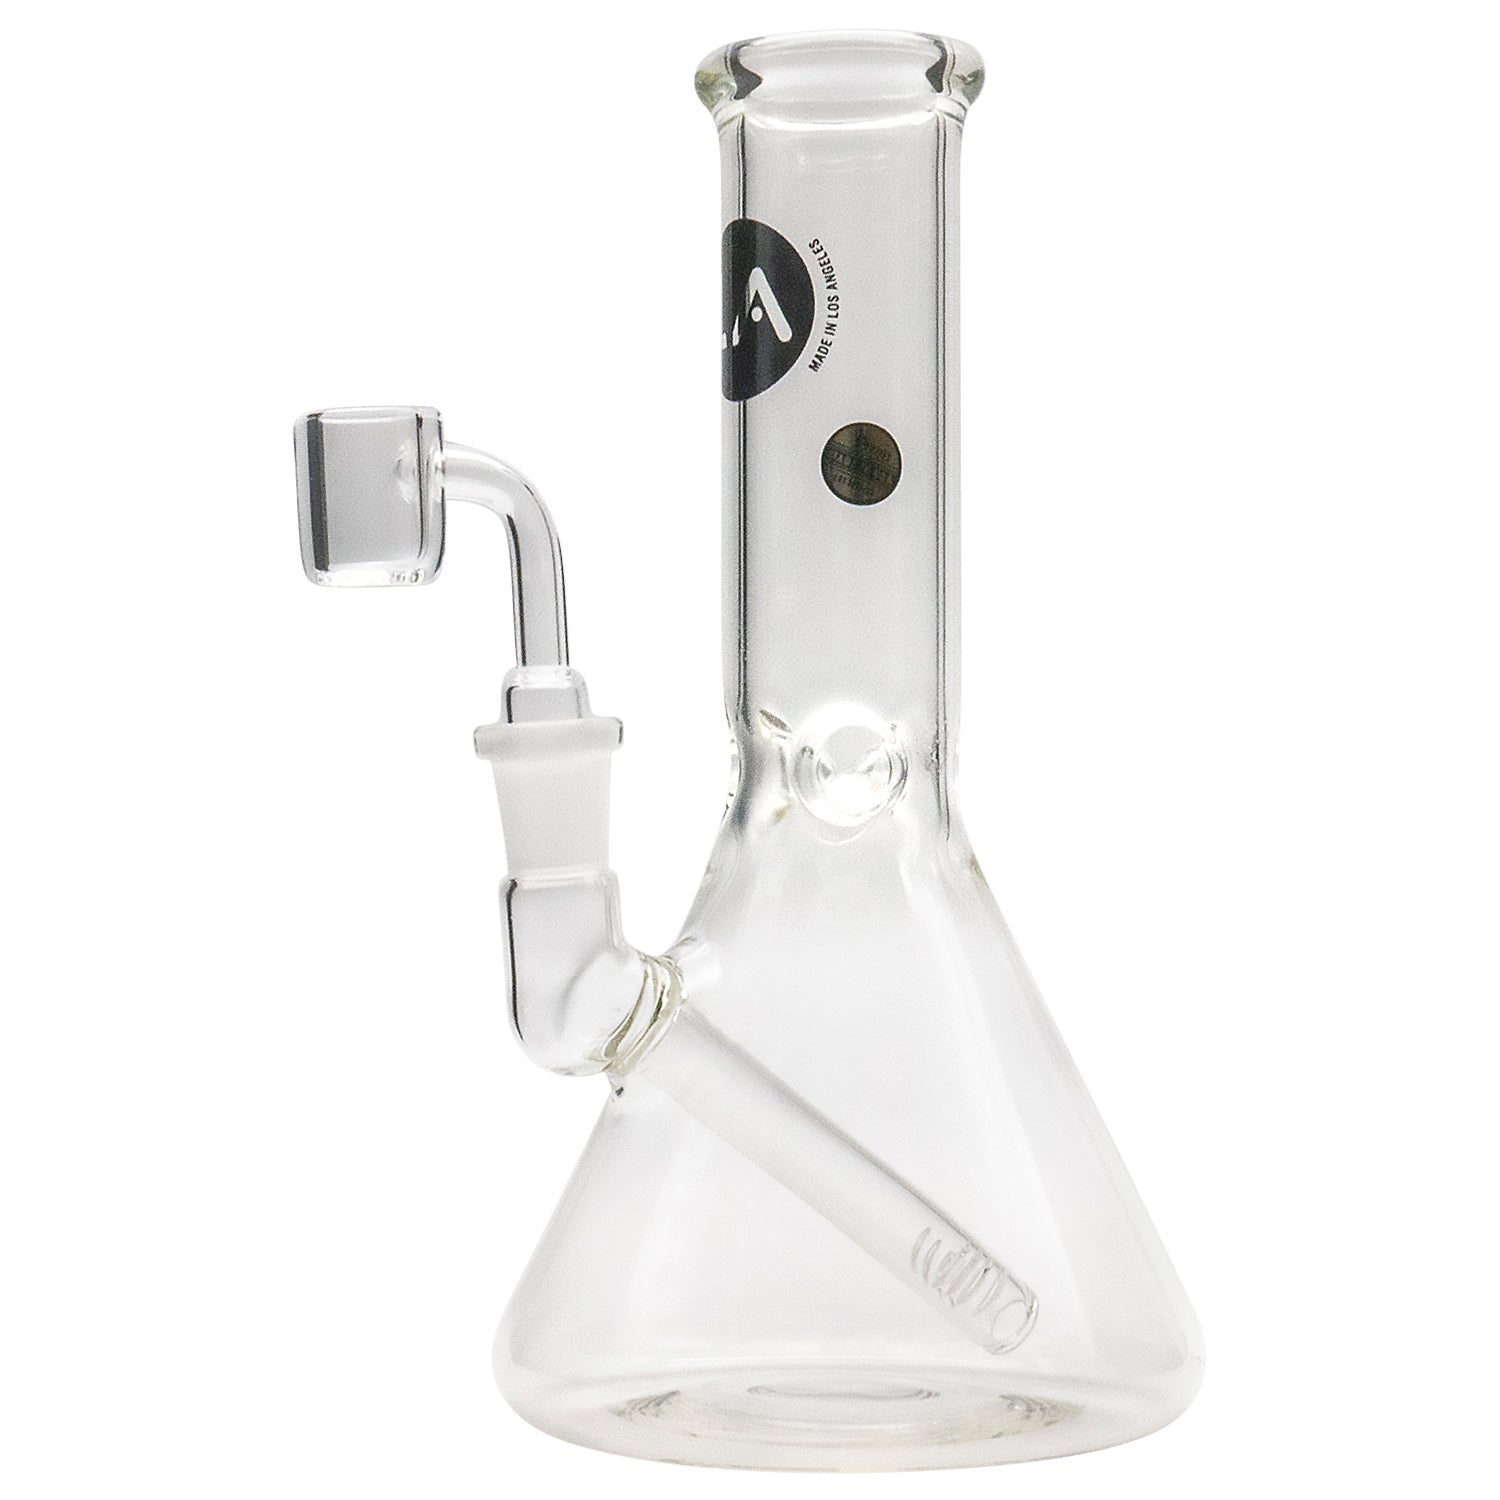 Pipes / Bongs & Dabbing Rigs : By  –